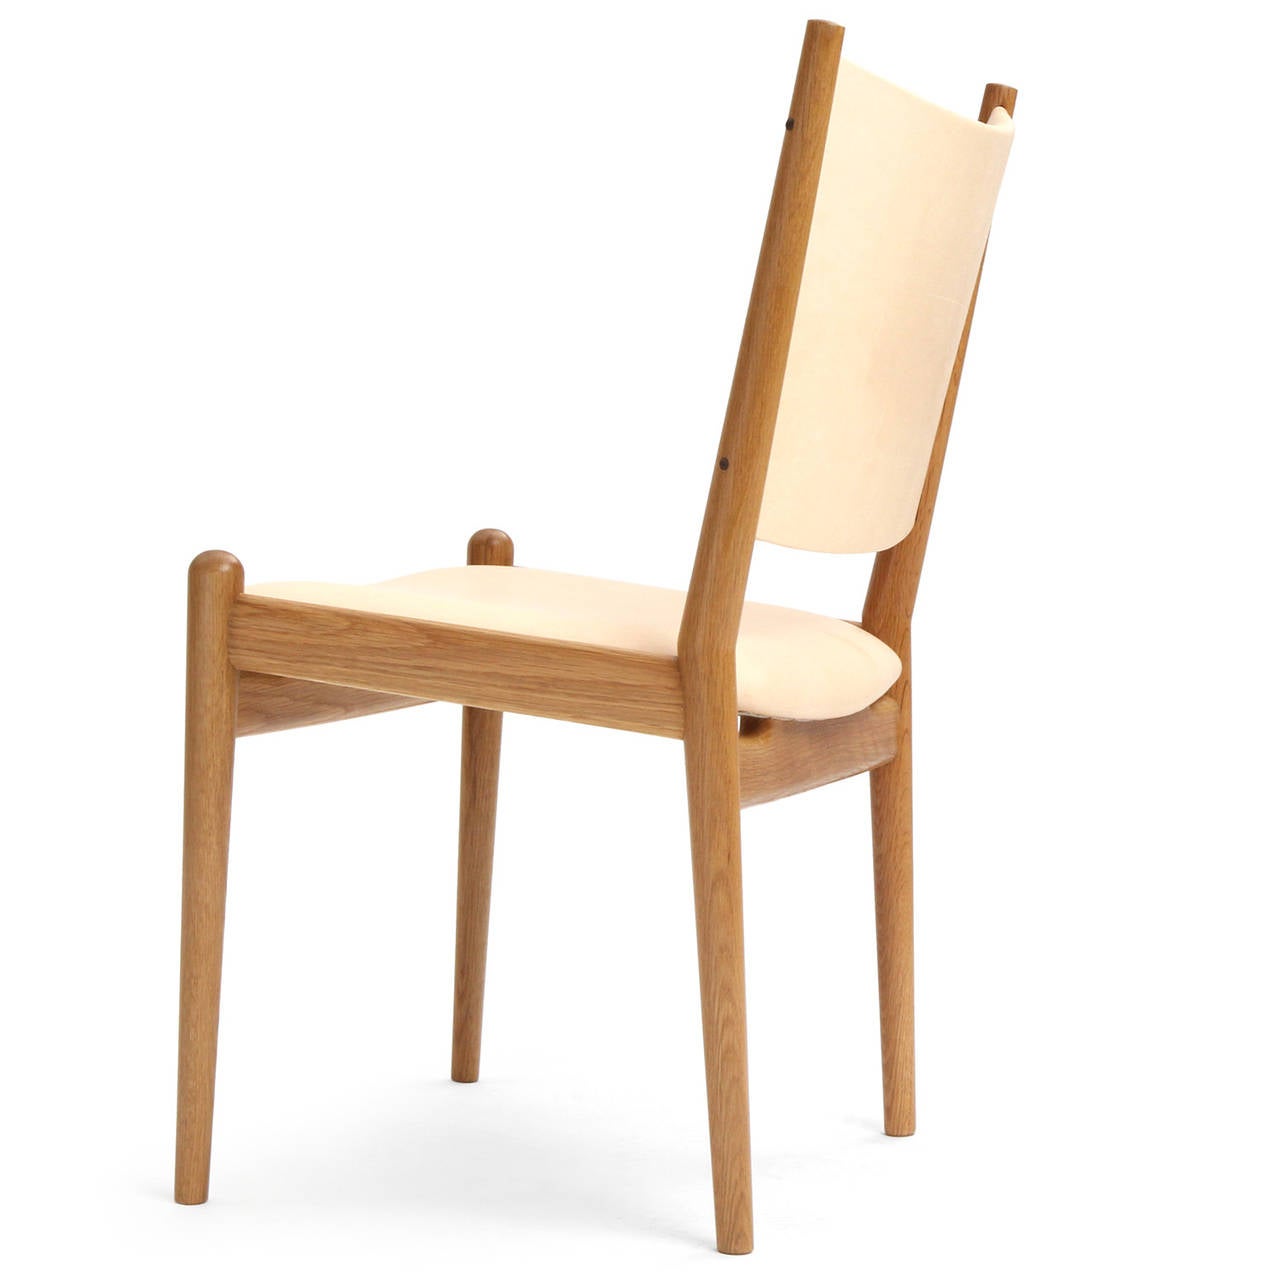 A superbly crafted dining chair largely devoid of extraneous detailing, having exposed oiled white oak frames with gently curved backs and tapered dowel-form legs and natural leather upholstery.